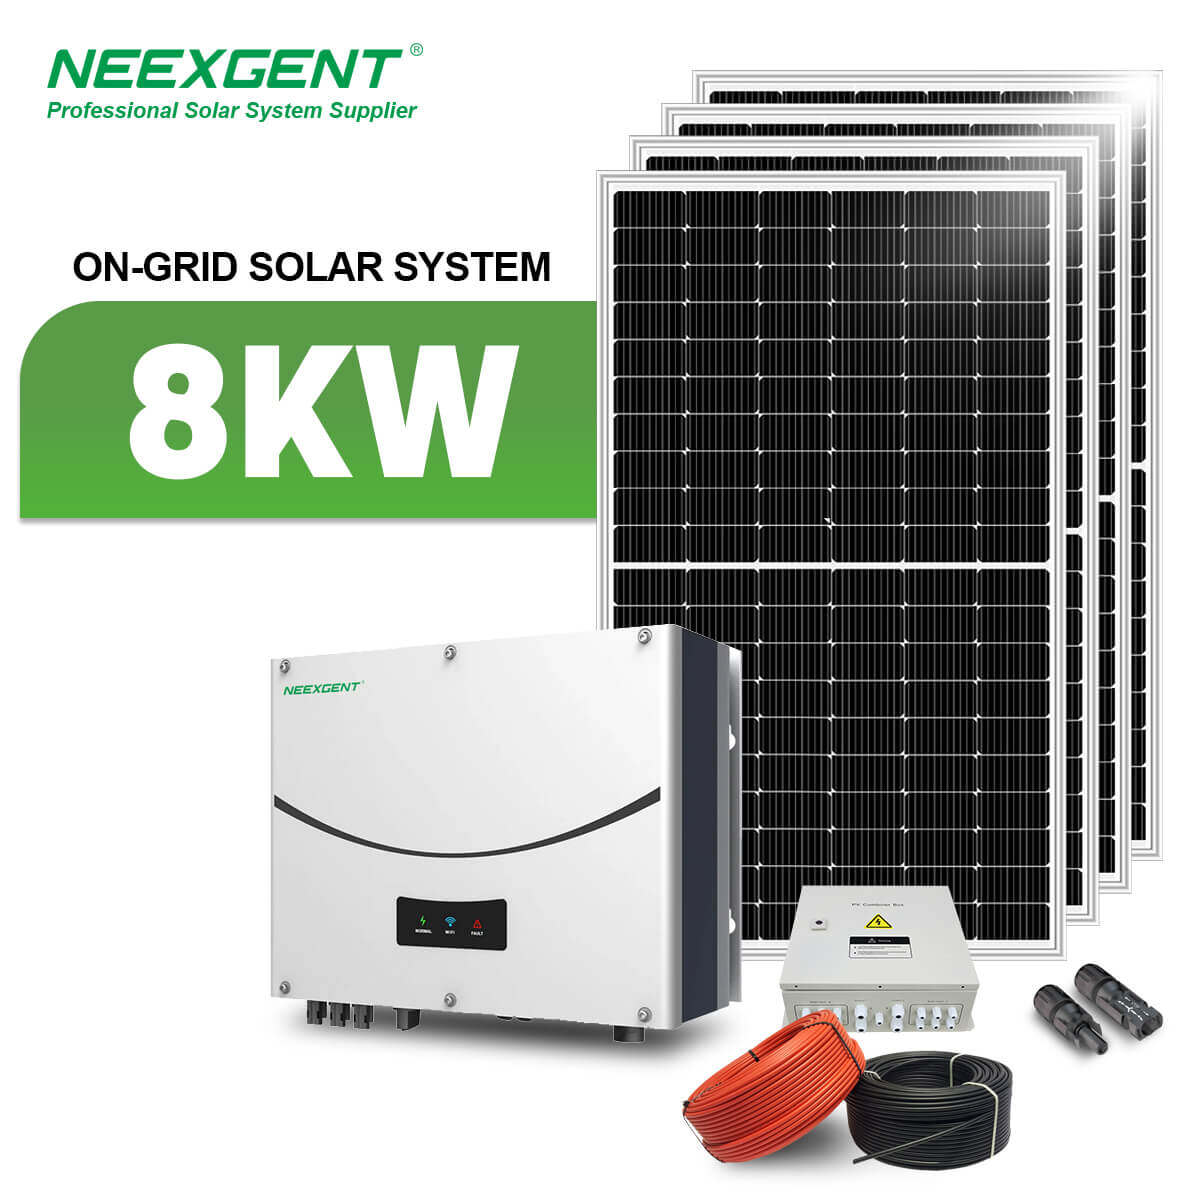 Neexgent 8kw On-grid Easy Install Photovoltaic Single Phase Solar Home Power System